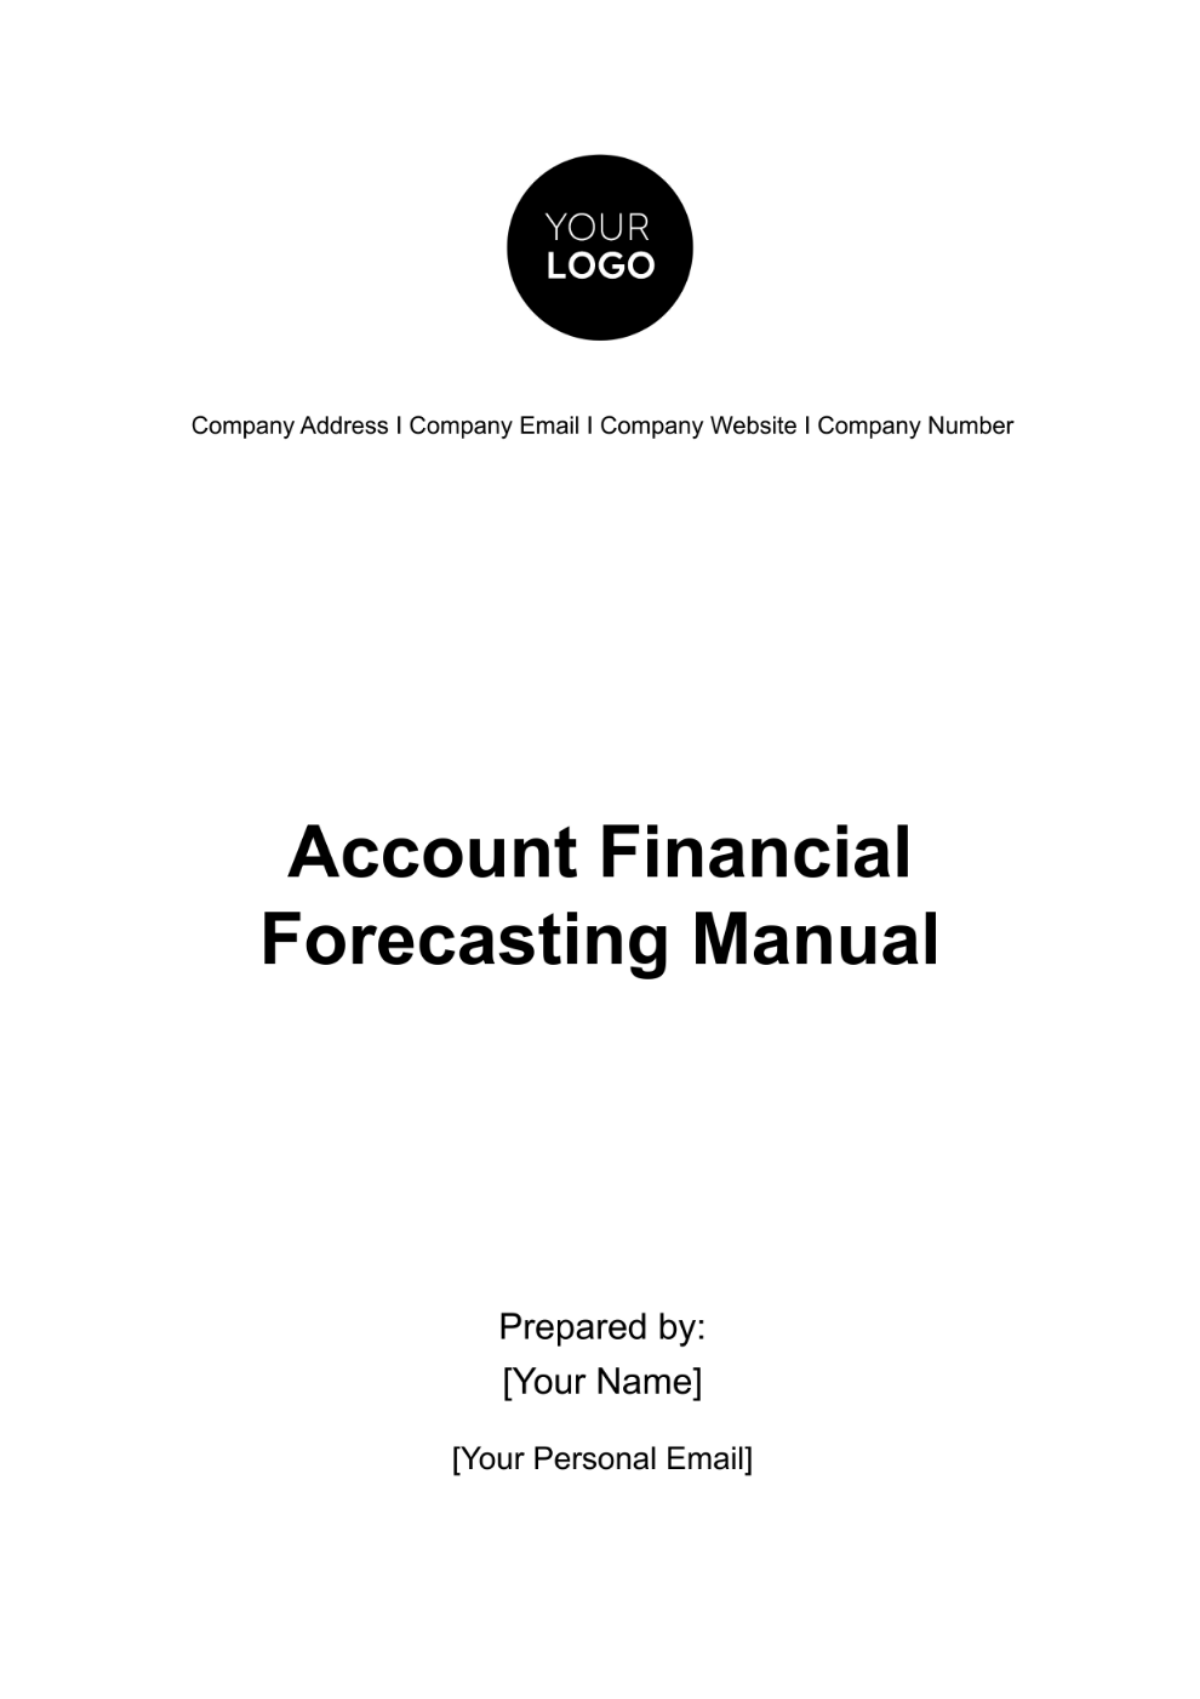 Account Financial Forecasting Manual Template